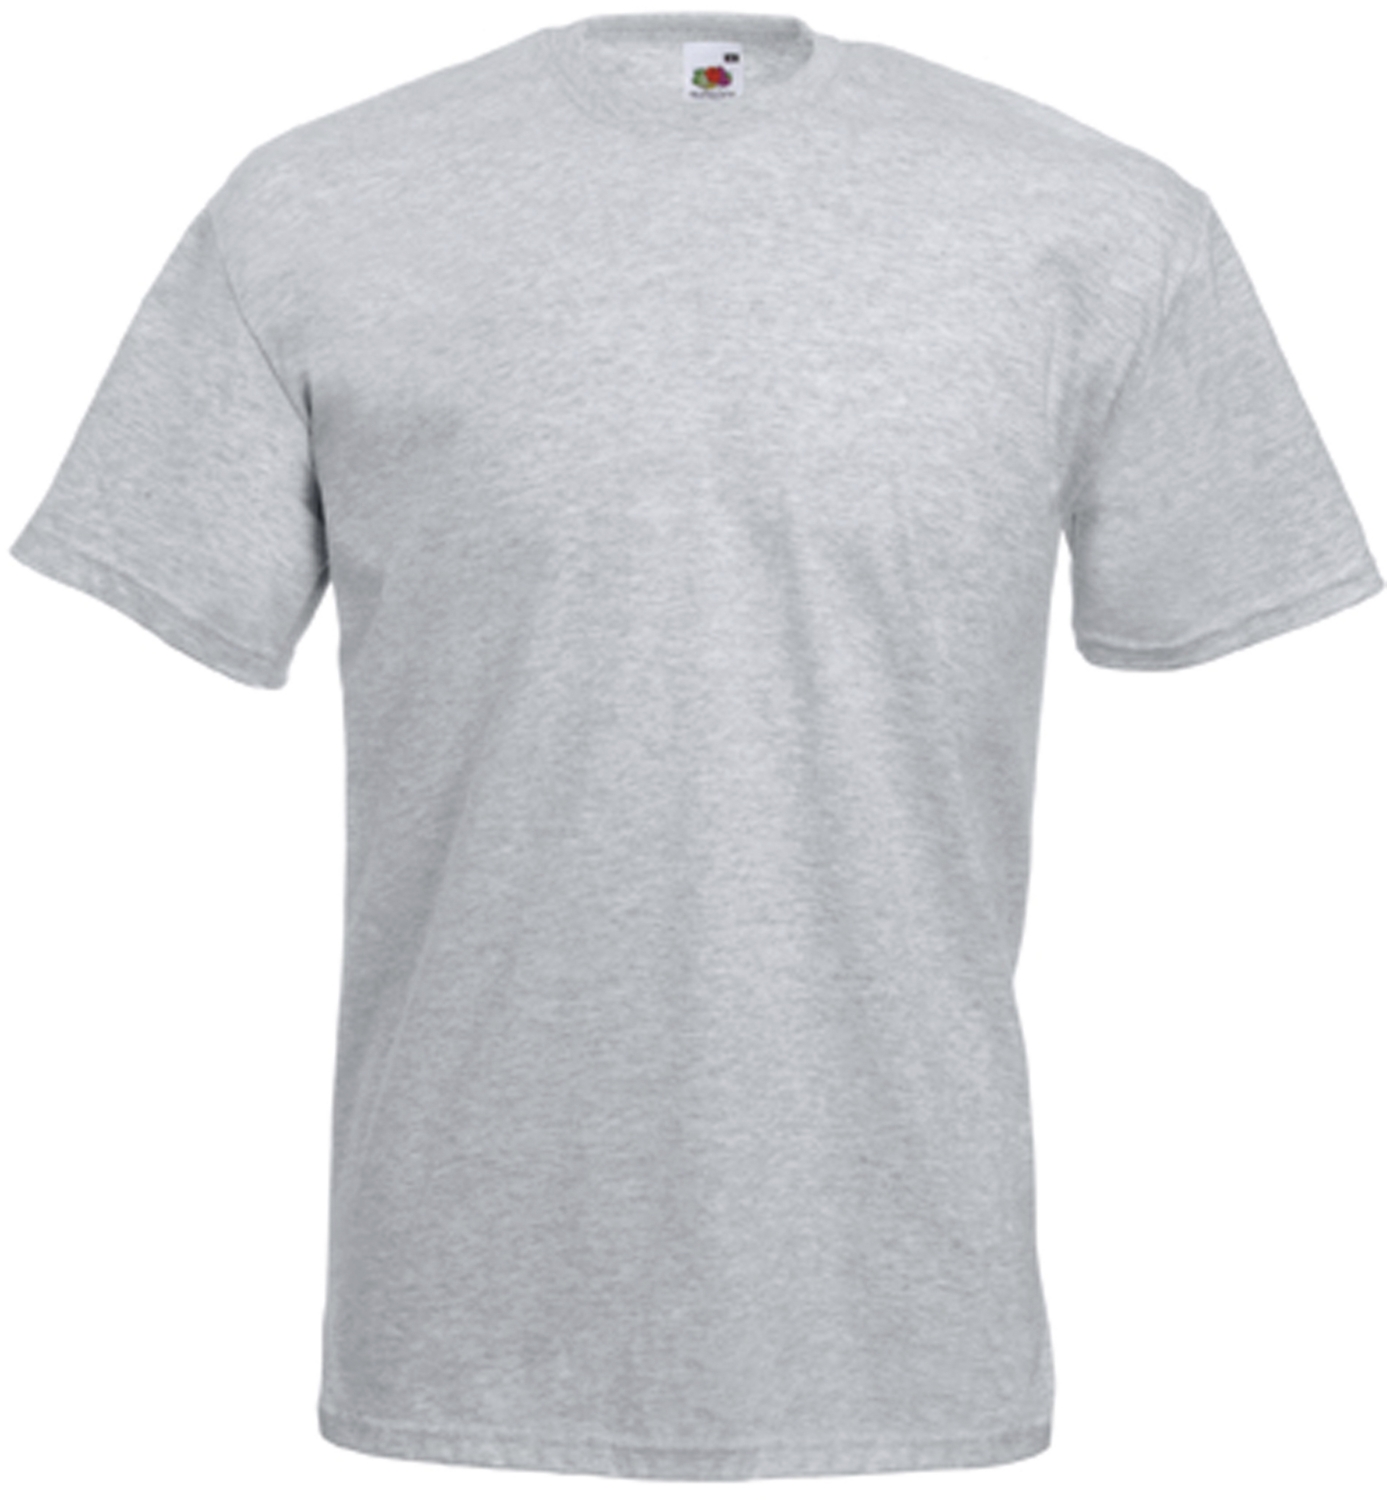 Tee-shirt Value-Weight - Gris heather Fruit Of The Loom